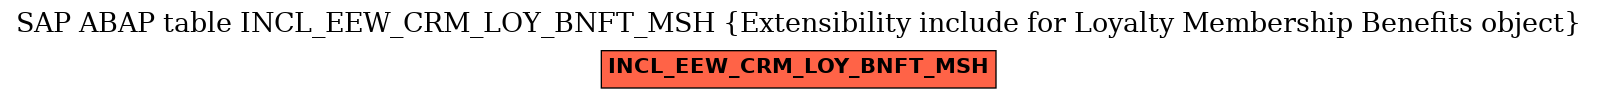 E-R Diagram for table INCL_EEW_CRM_LOY_BNFT_MSH (Extensibility include for Loyalty Membership Benefits object)